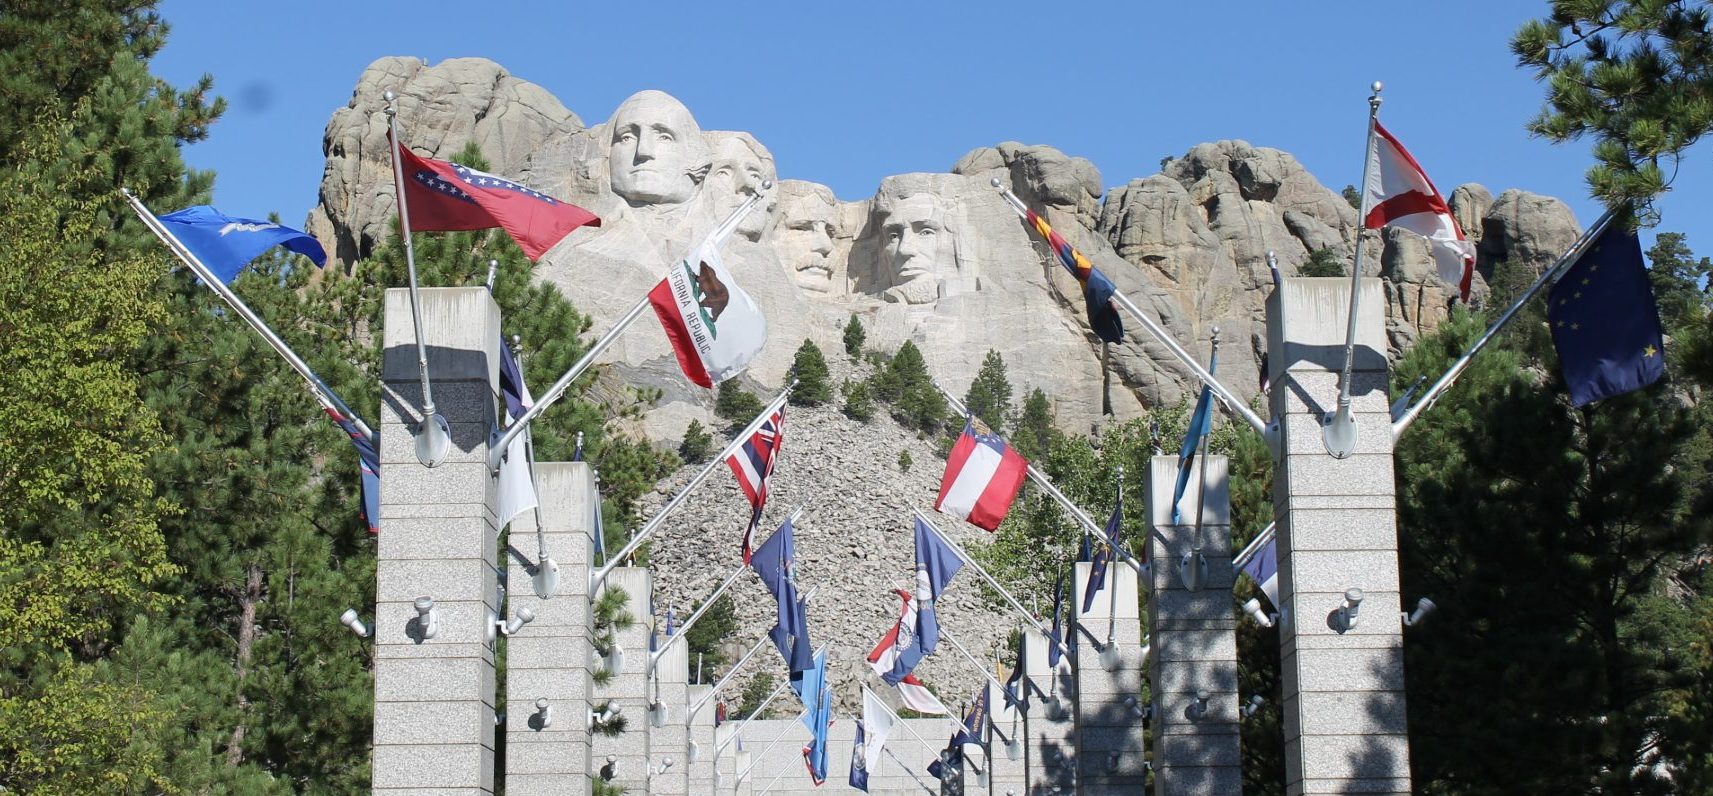 Avenue of States' Flags Mt. Rushmore